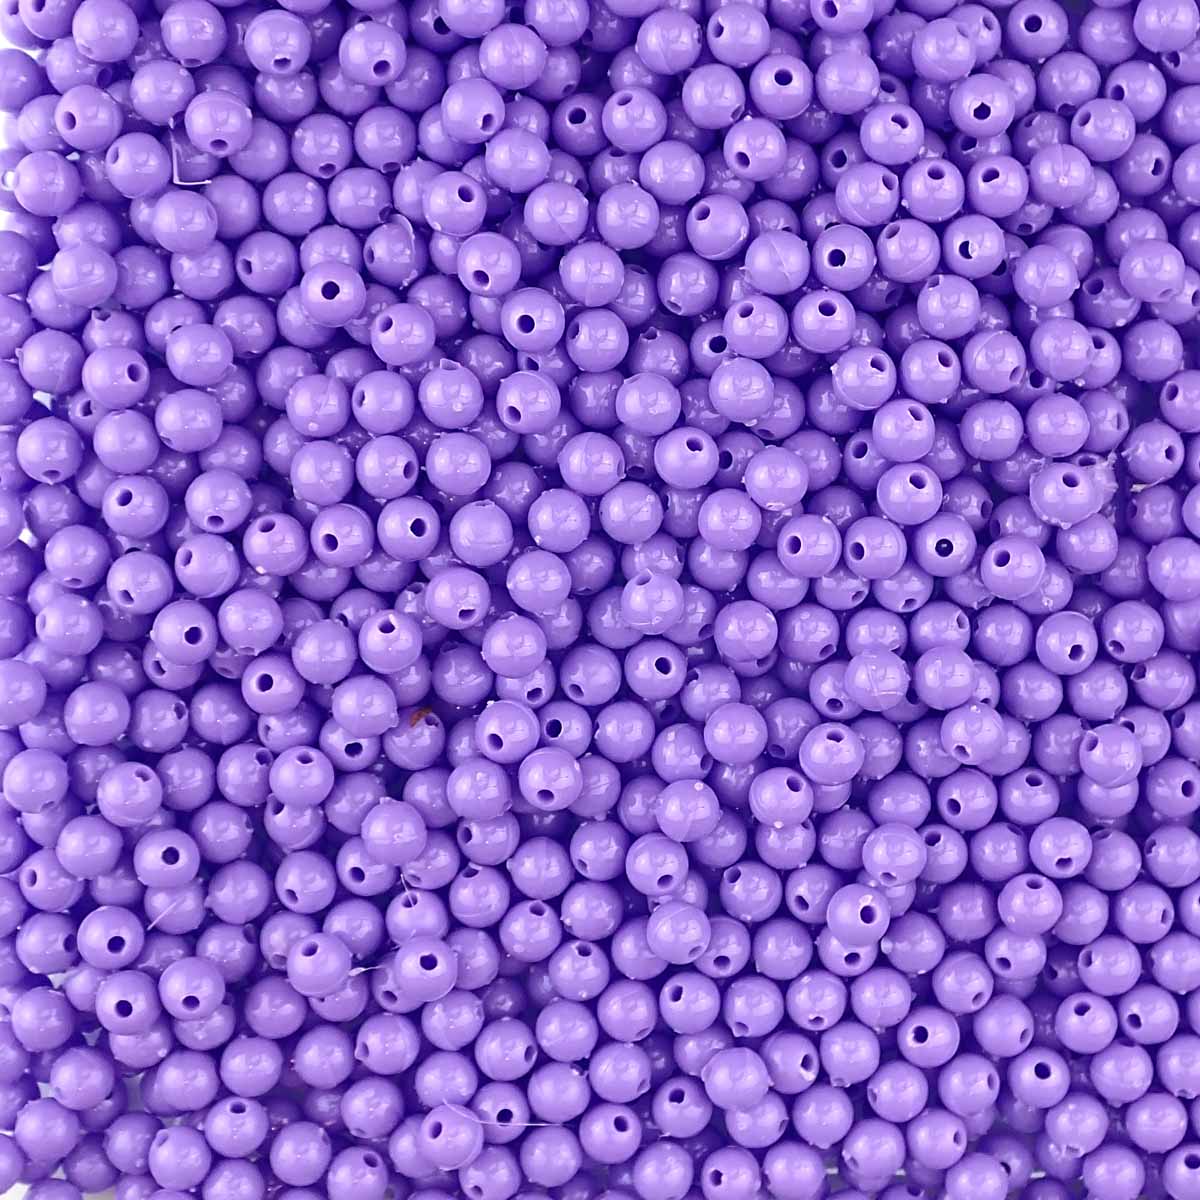 6mm Round Plastic Craft Beads, Lilac Purple Opaque, 500 beads